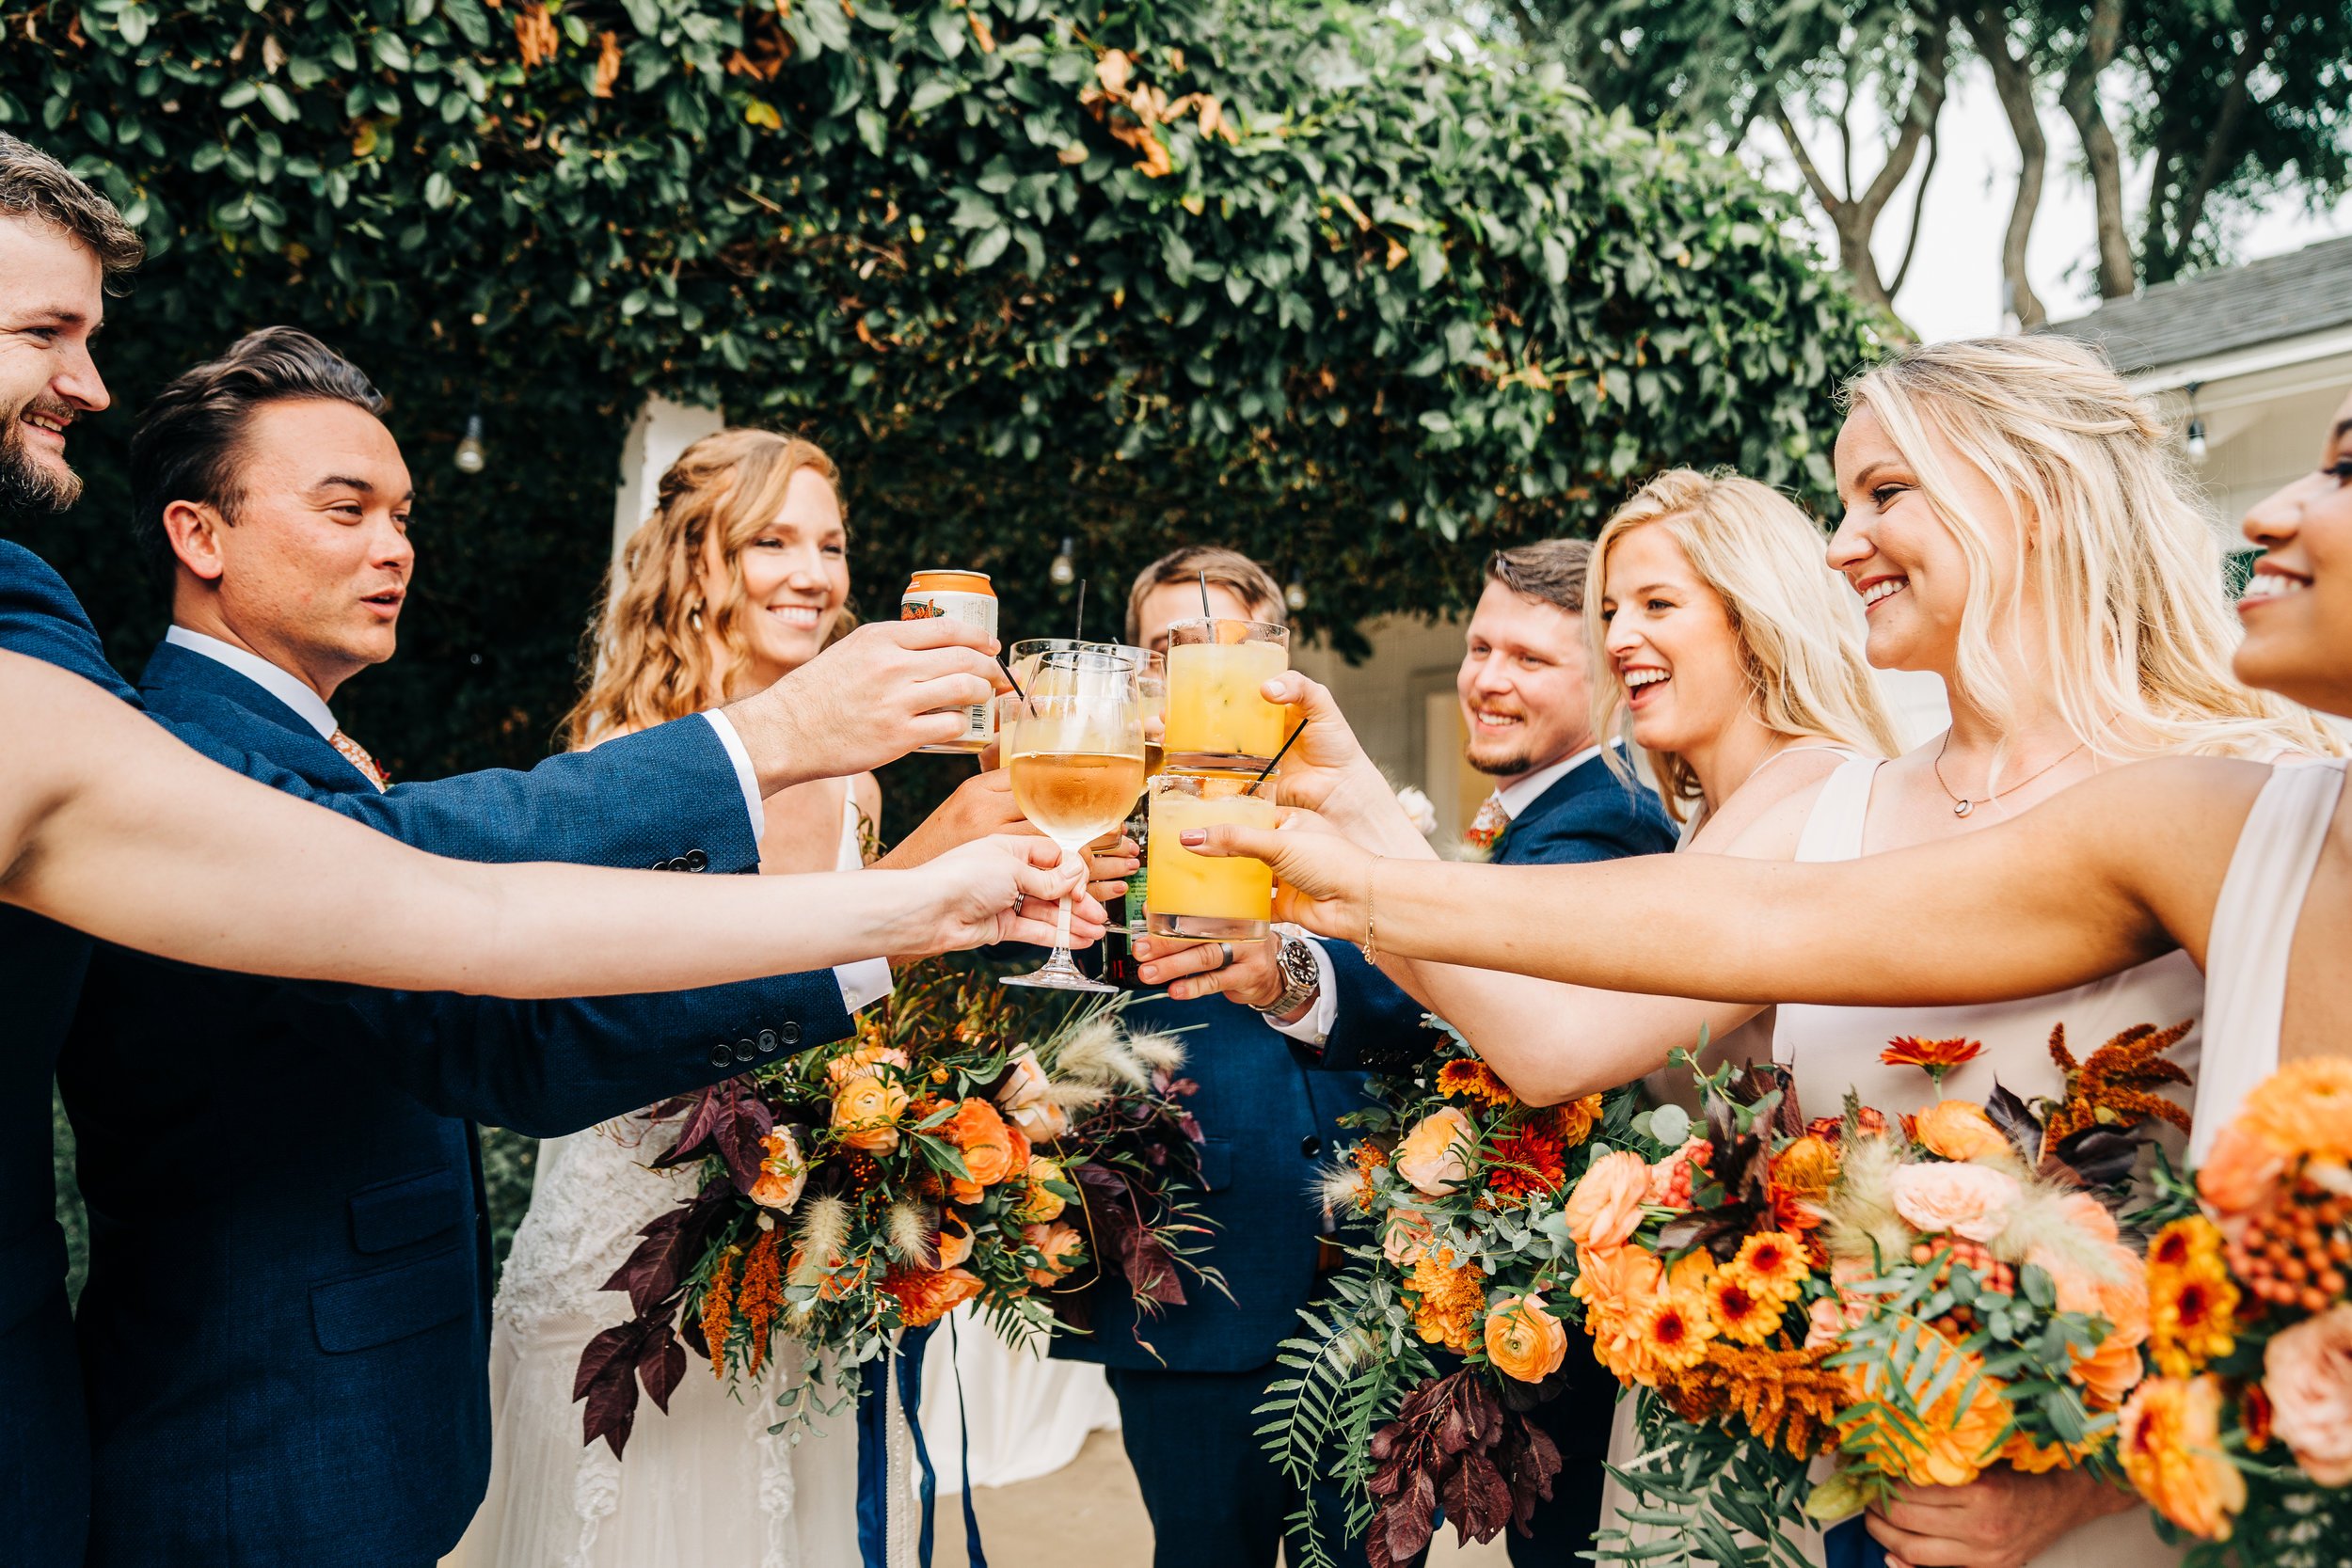 www.santabarbarawedding.com | Brandon Bibbins Photography | The Cottages at Polo Run | Pure Joy Catering | Wedding Party Cheers